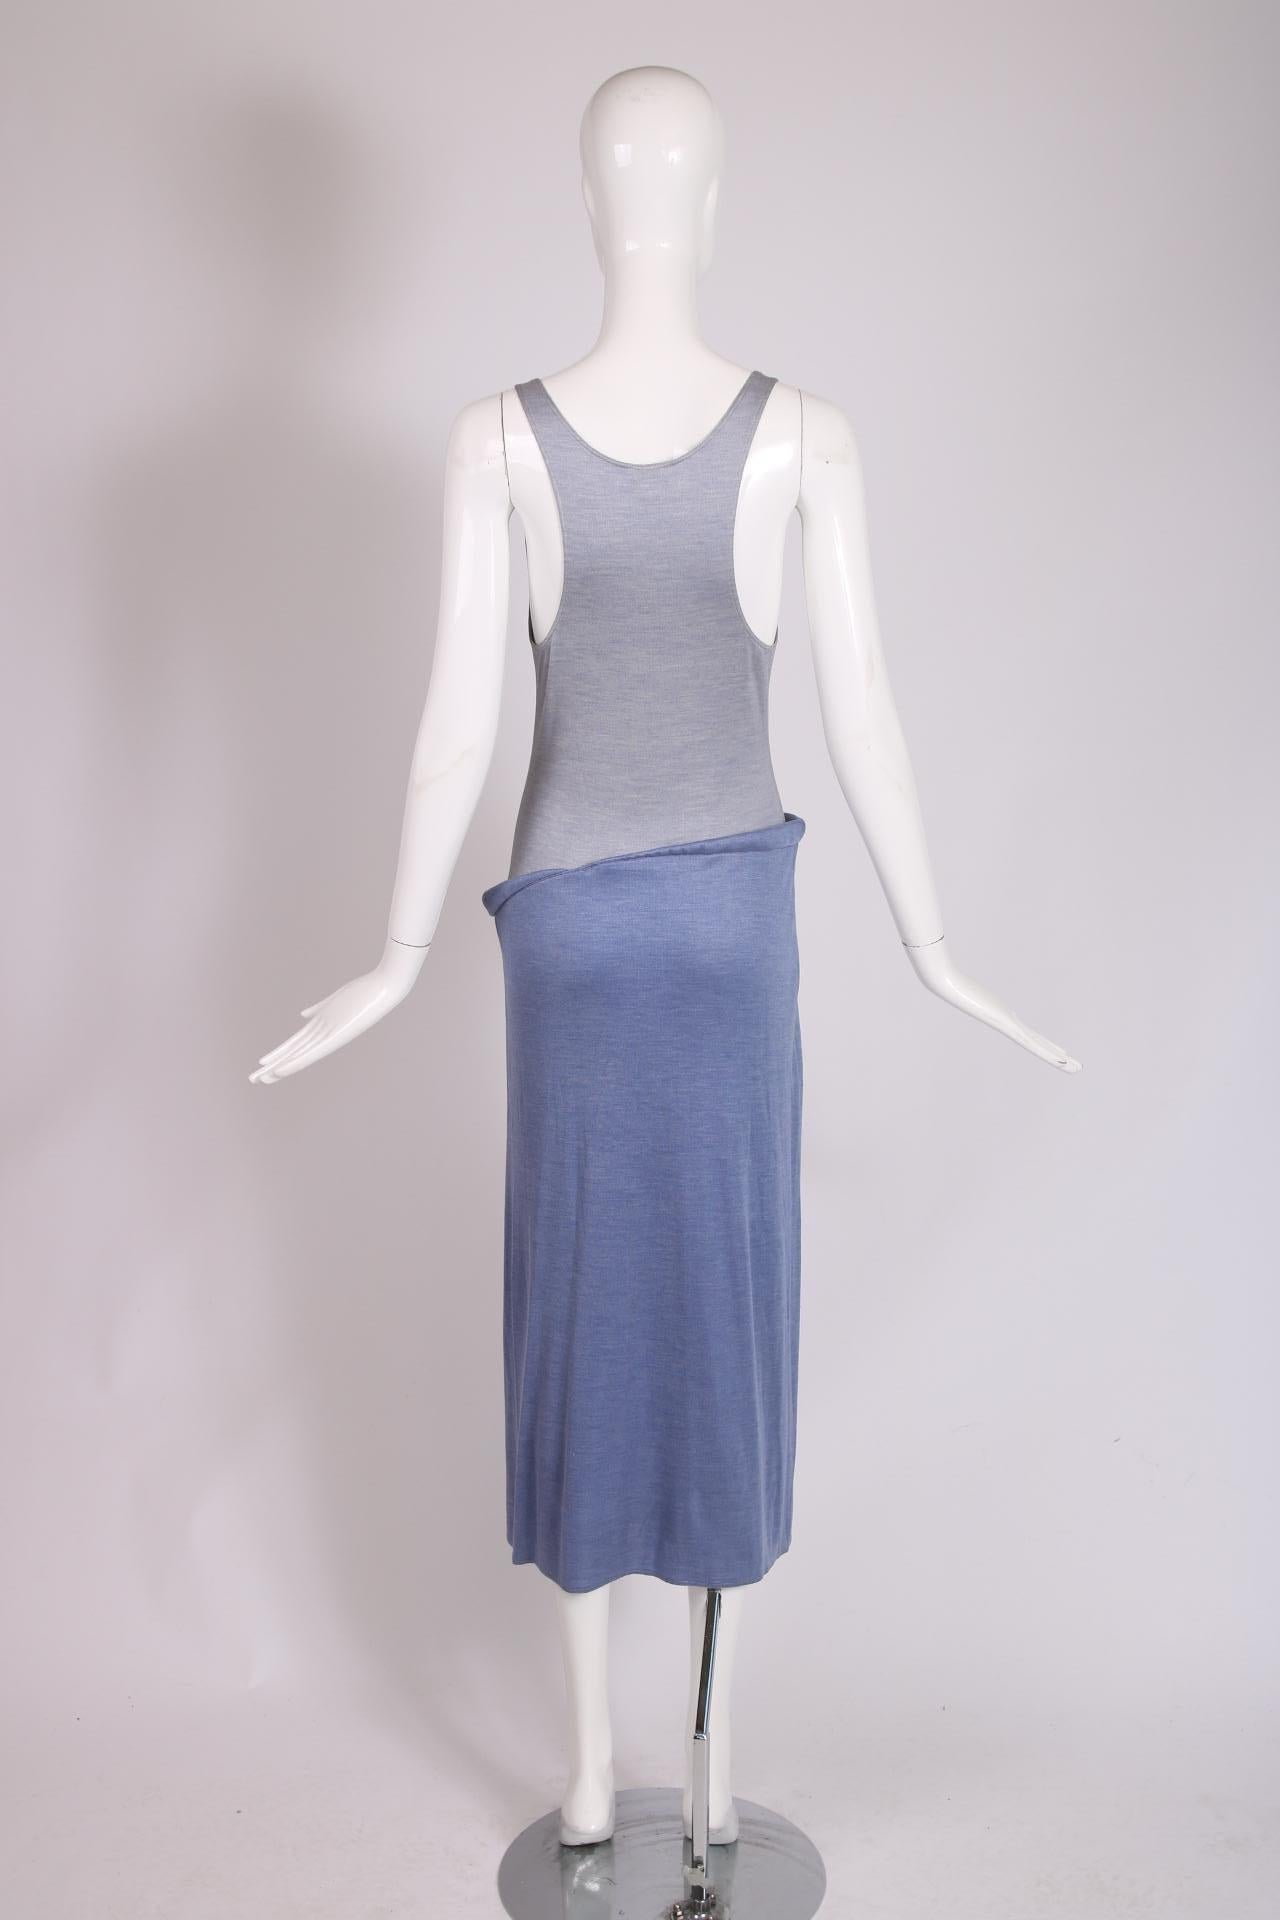 Geoffrey Beene Purple Two-Tone Silk Jersey Racer Back Dress, 1999 In Excellent Condition For Sale In Studio City, CA